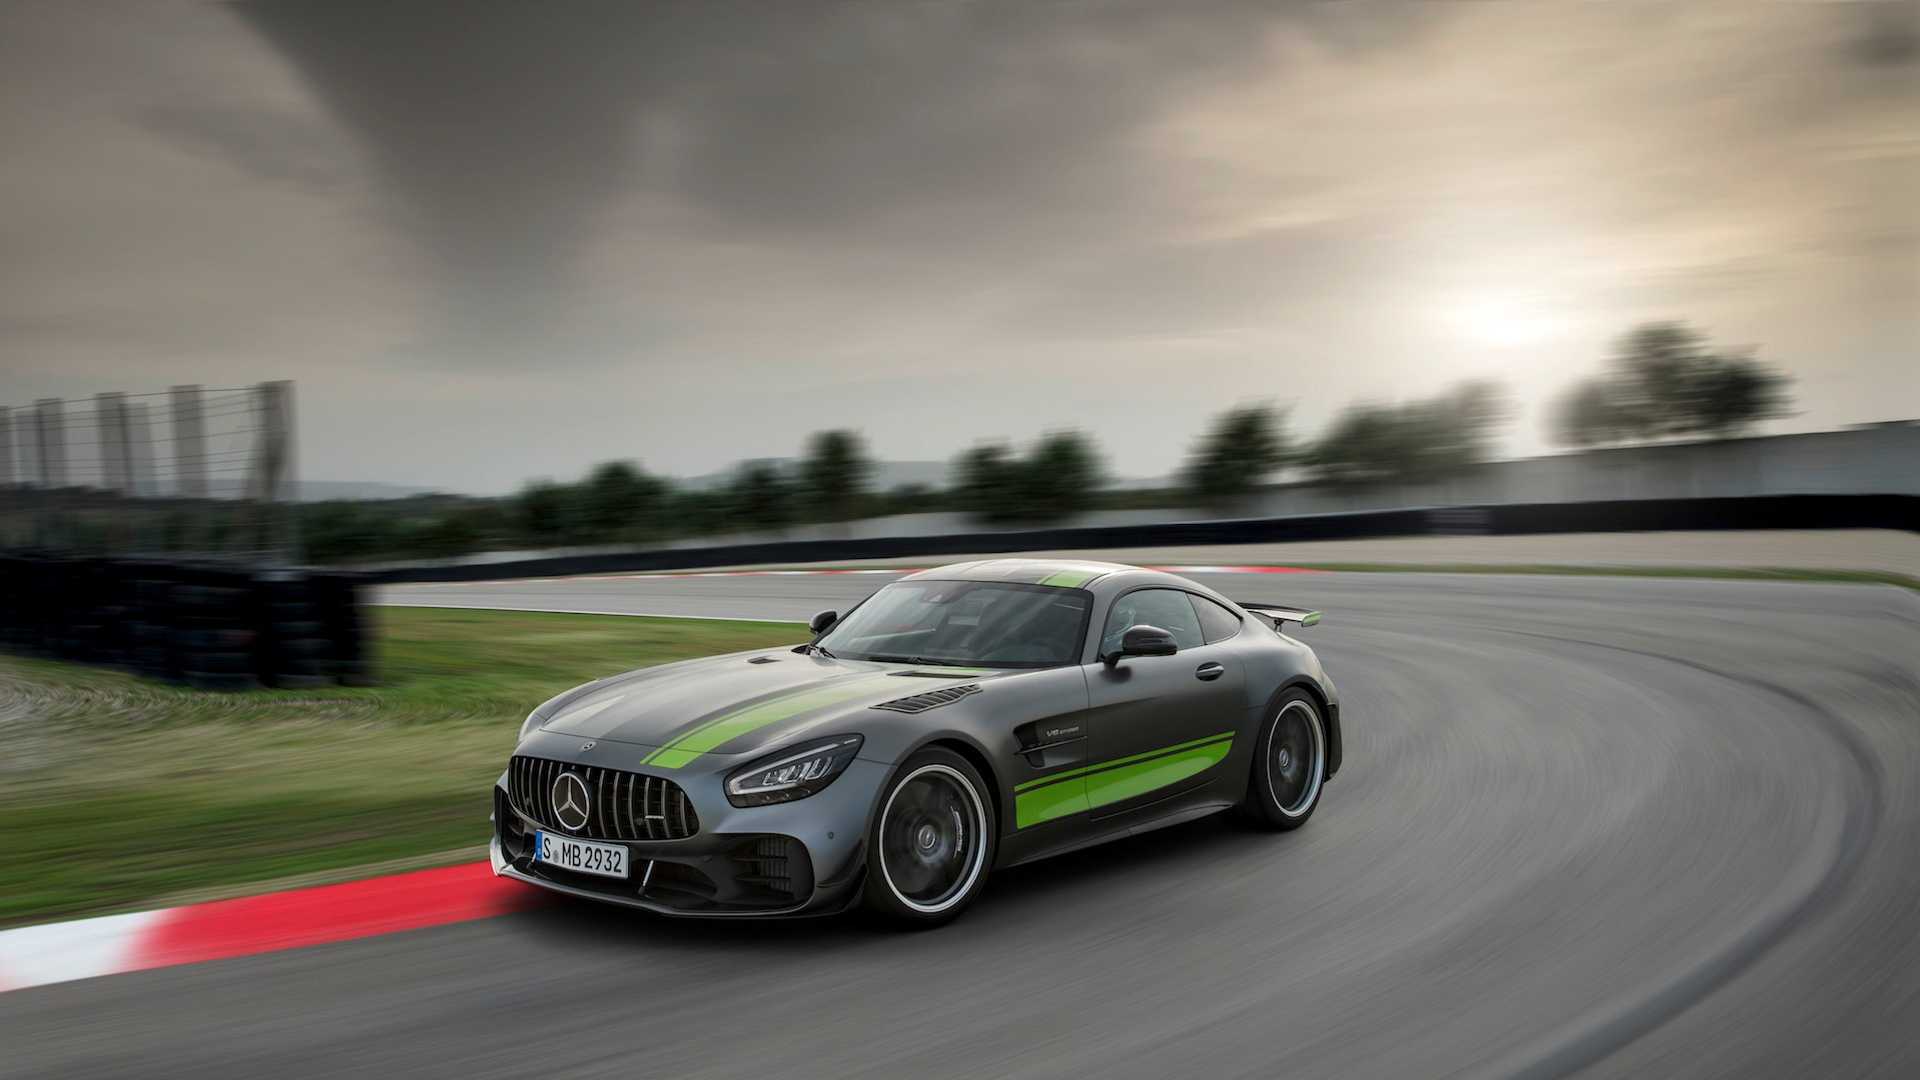 Mercedes AMG GT R Launched In India, Priced At Rs. 2.48 Crore